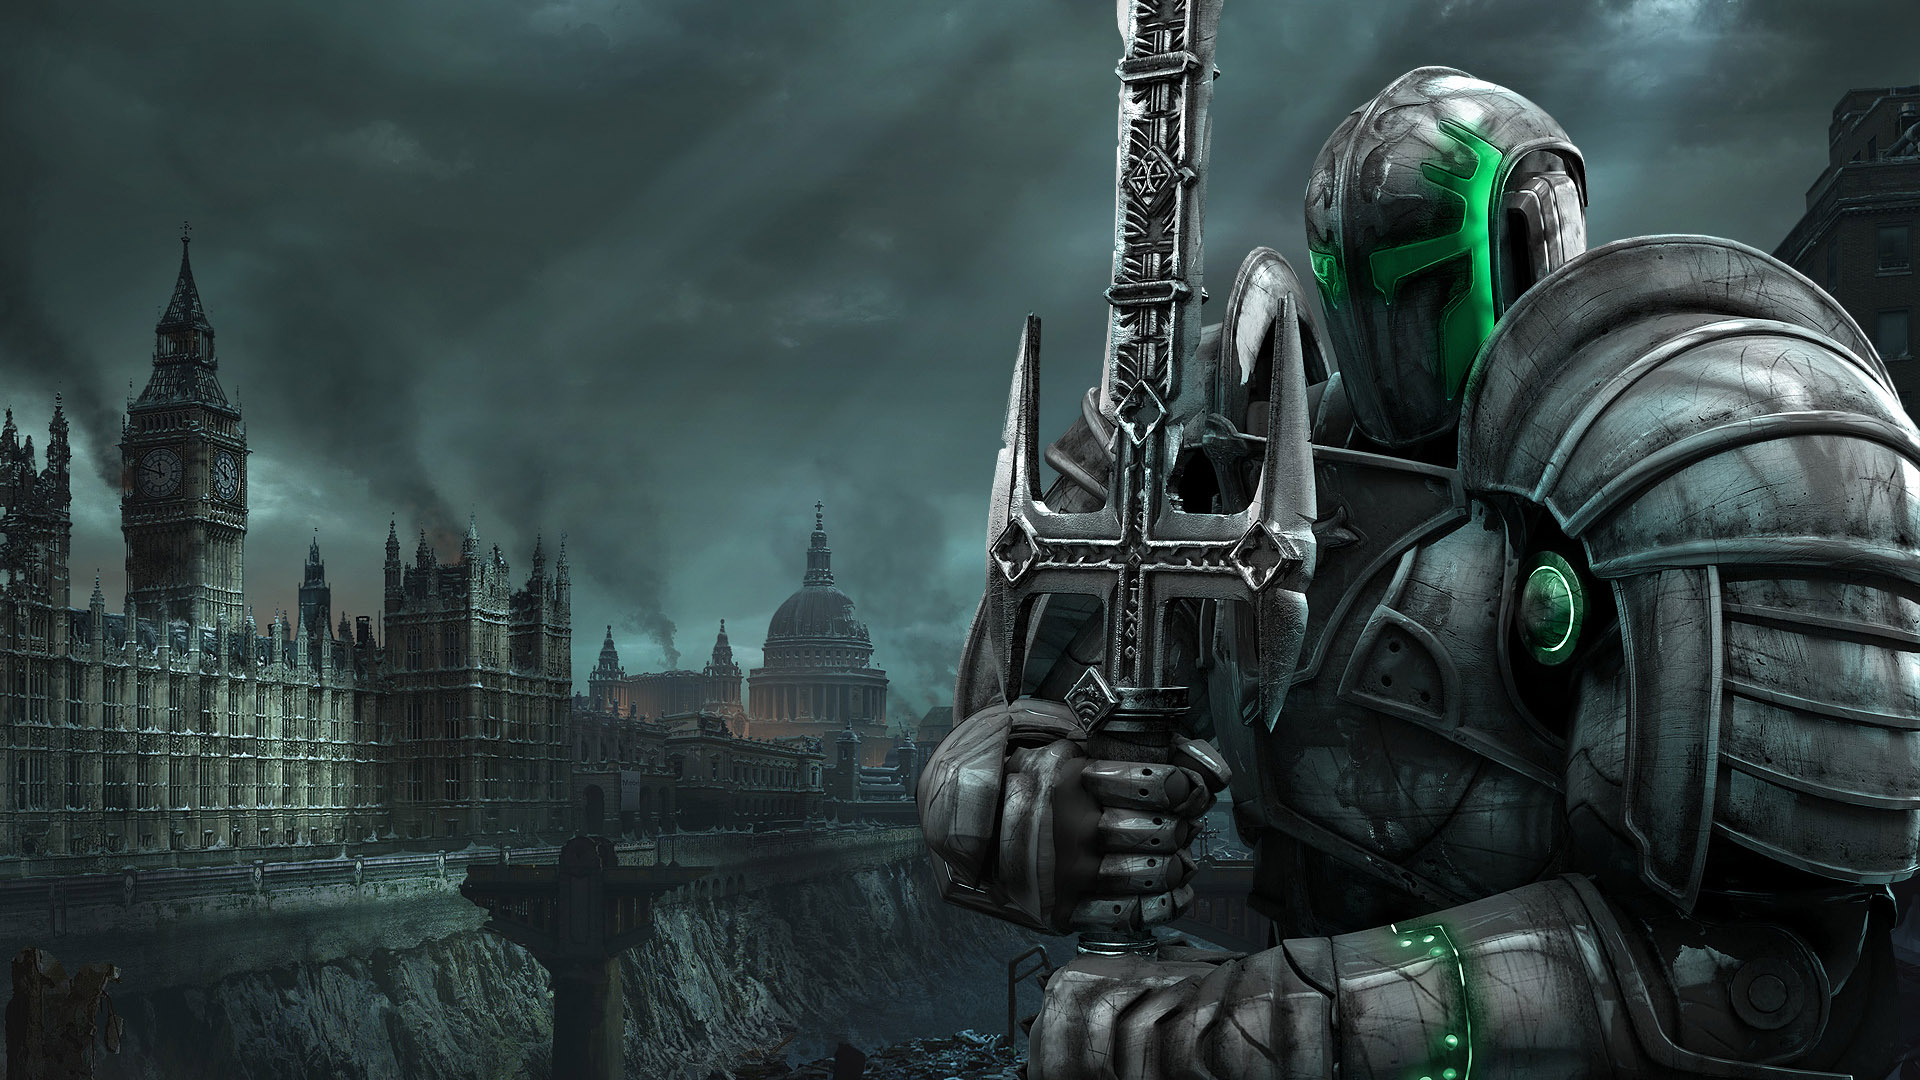 Download mobile wallpaper Video Game, Hellgate: London for free.